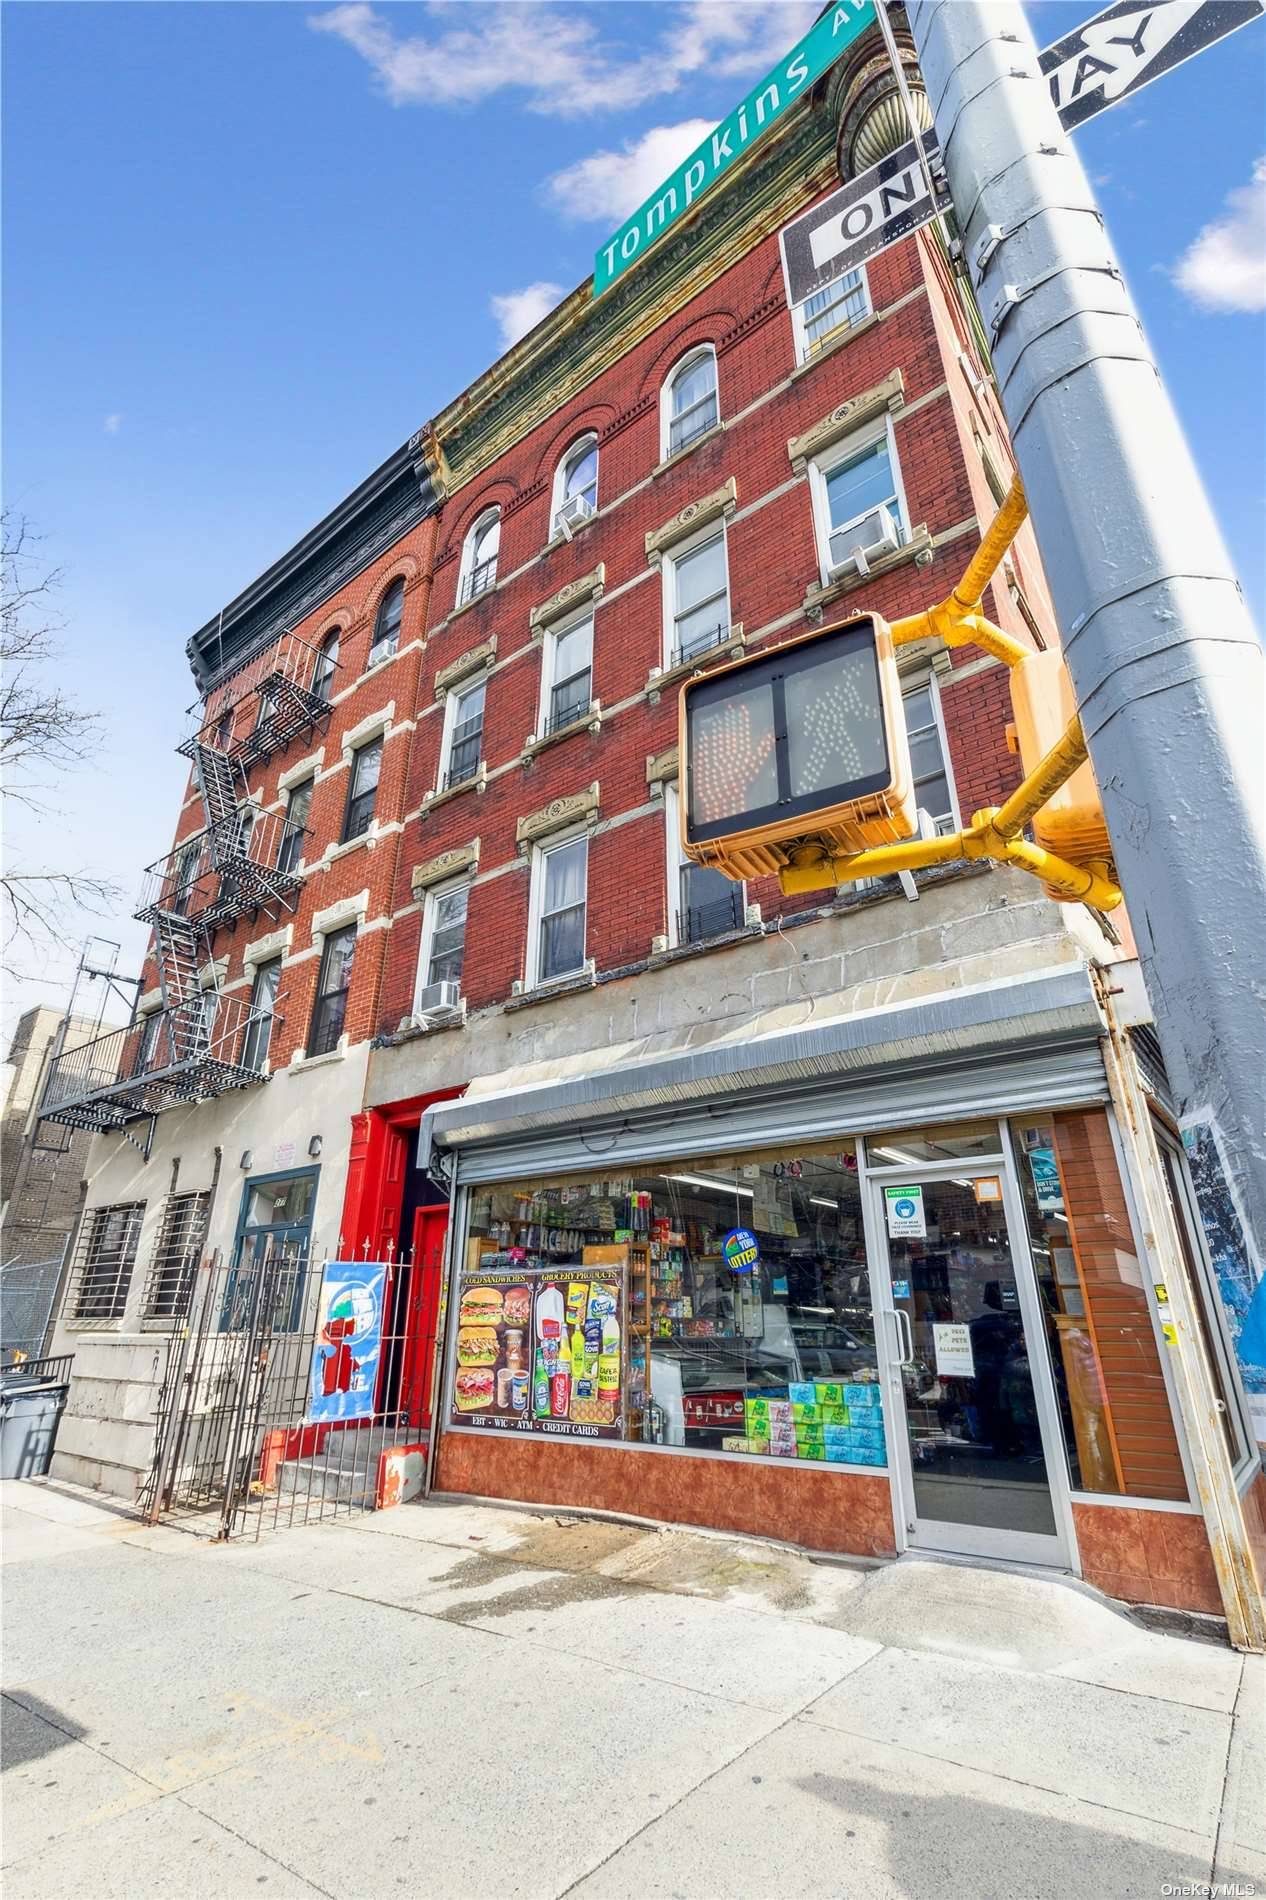 Back on the market ! Are you looking for an amazing investment opportunity in a vibrant Brooklyn neighborhood !